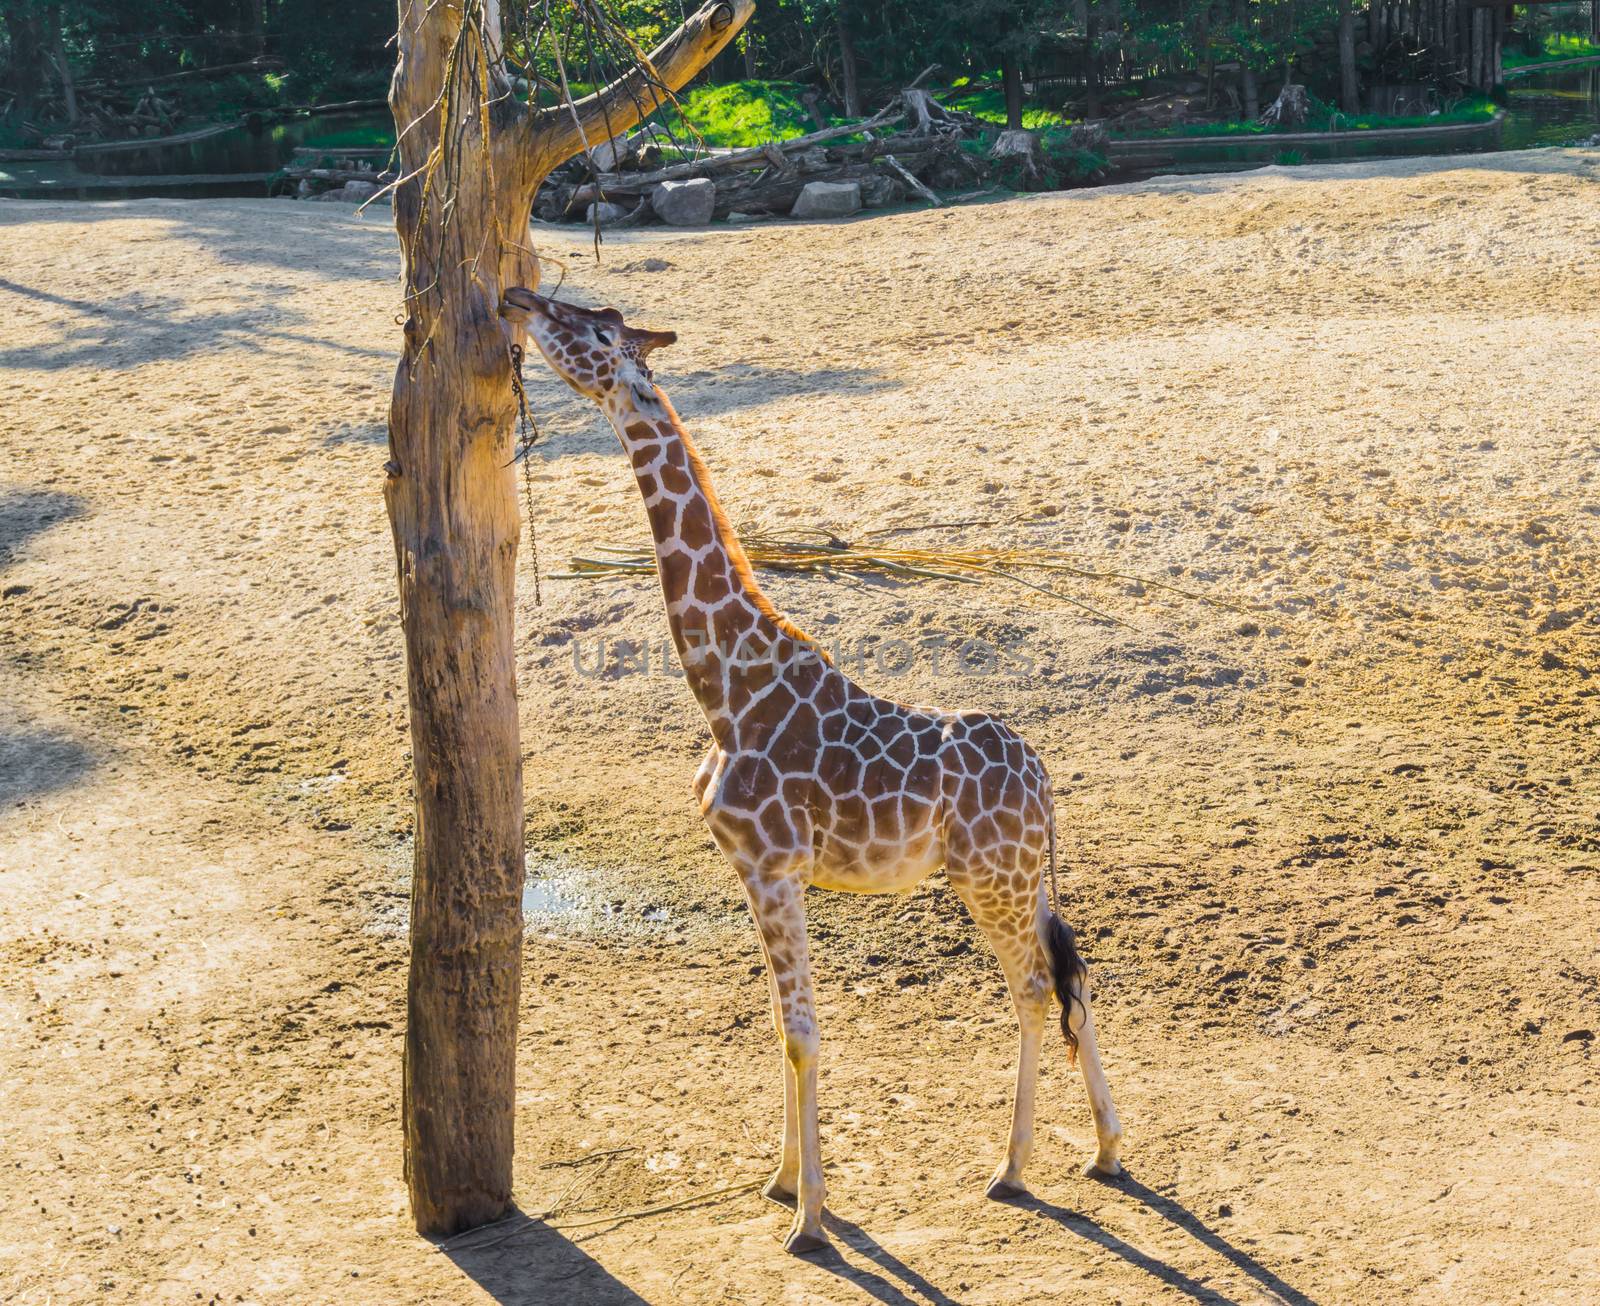 savanna animal portrait of a giraffe reaching and eating from a branch in a tree by charlottebleijenberg